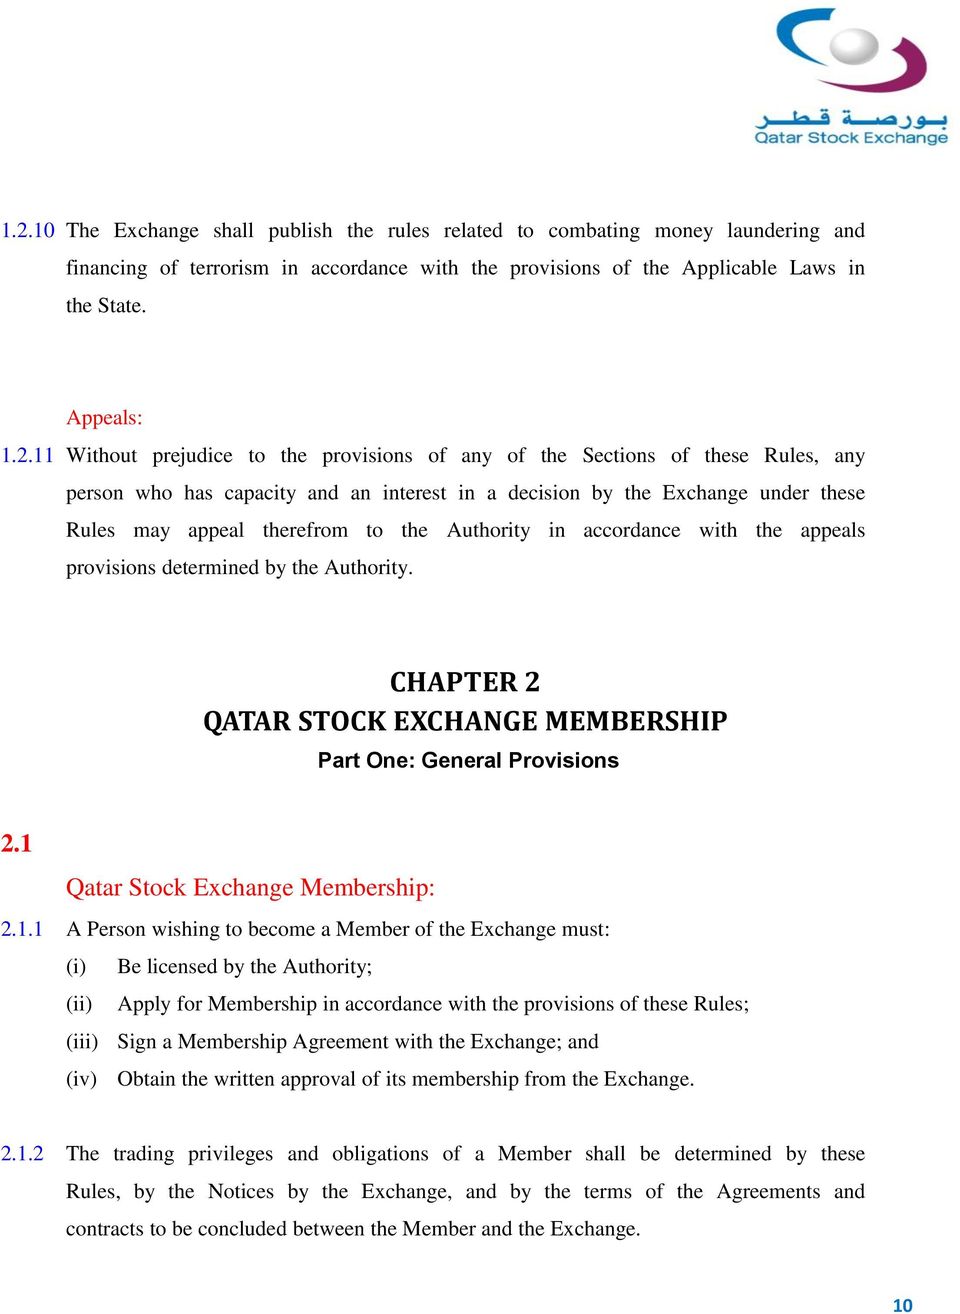 Authority in accordance with the appeals provisions determined by the Authority. CHAPTER 2 QATAR STOCK EXCHANGE MEMBERSHIP Part One: General Provisions 2.1 